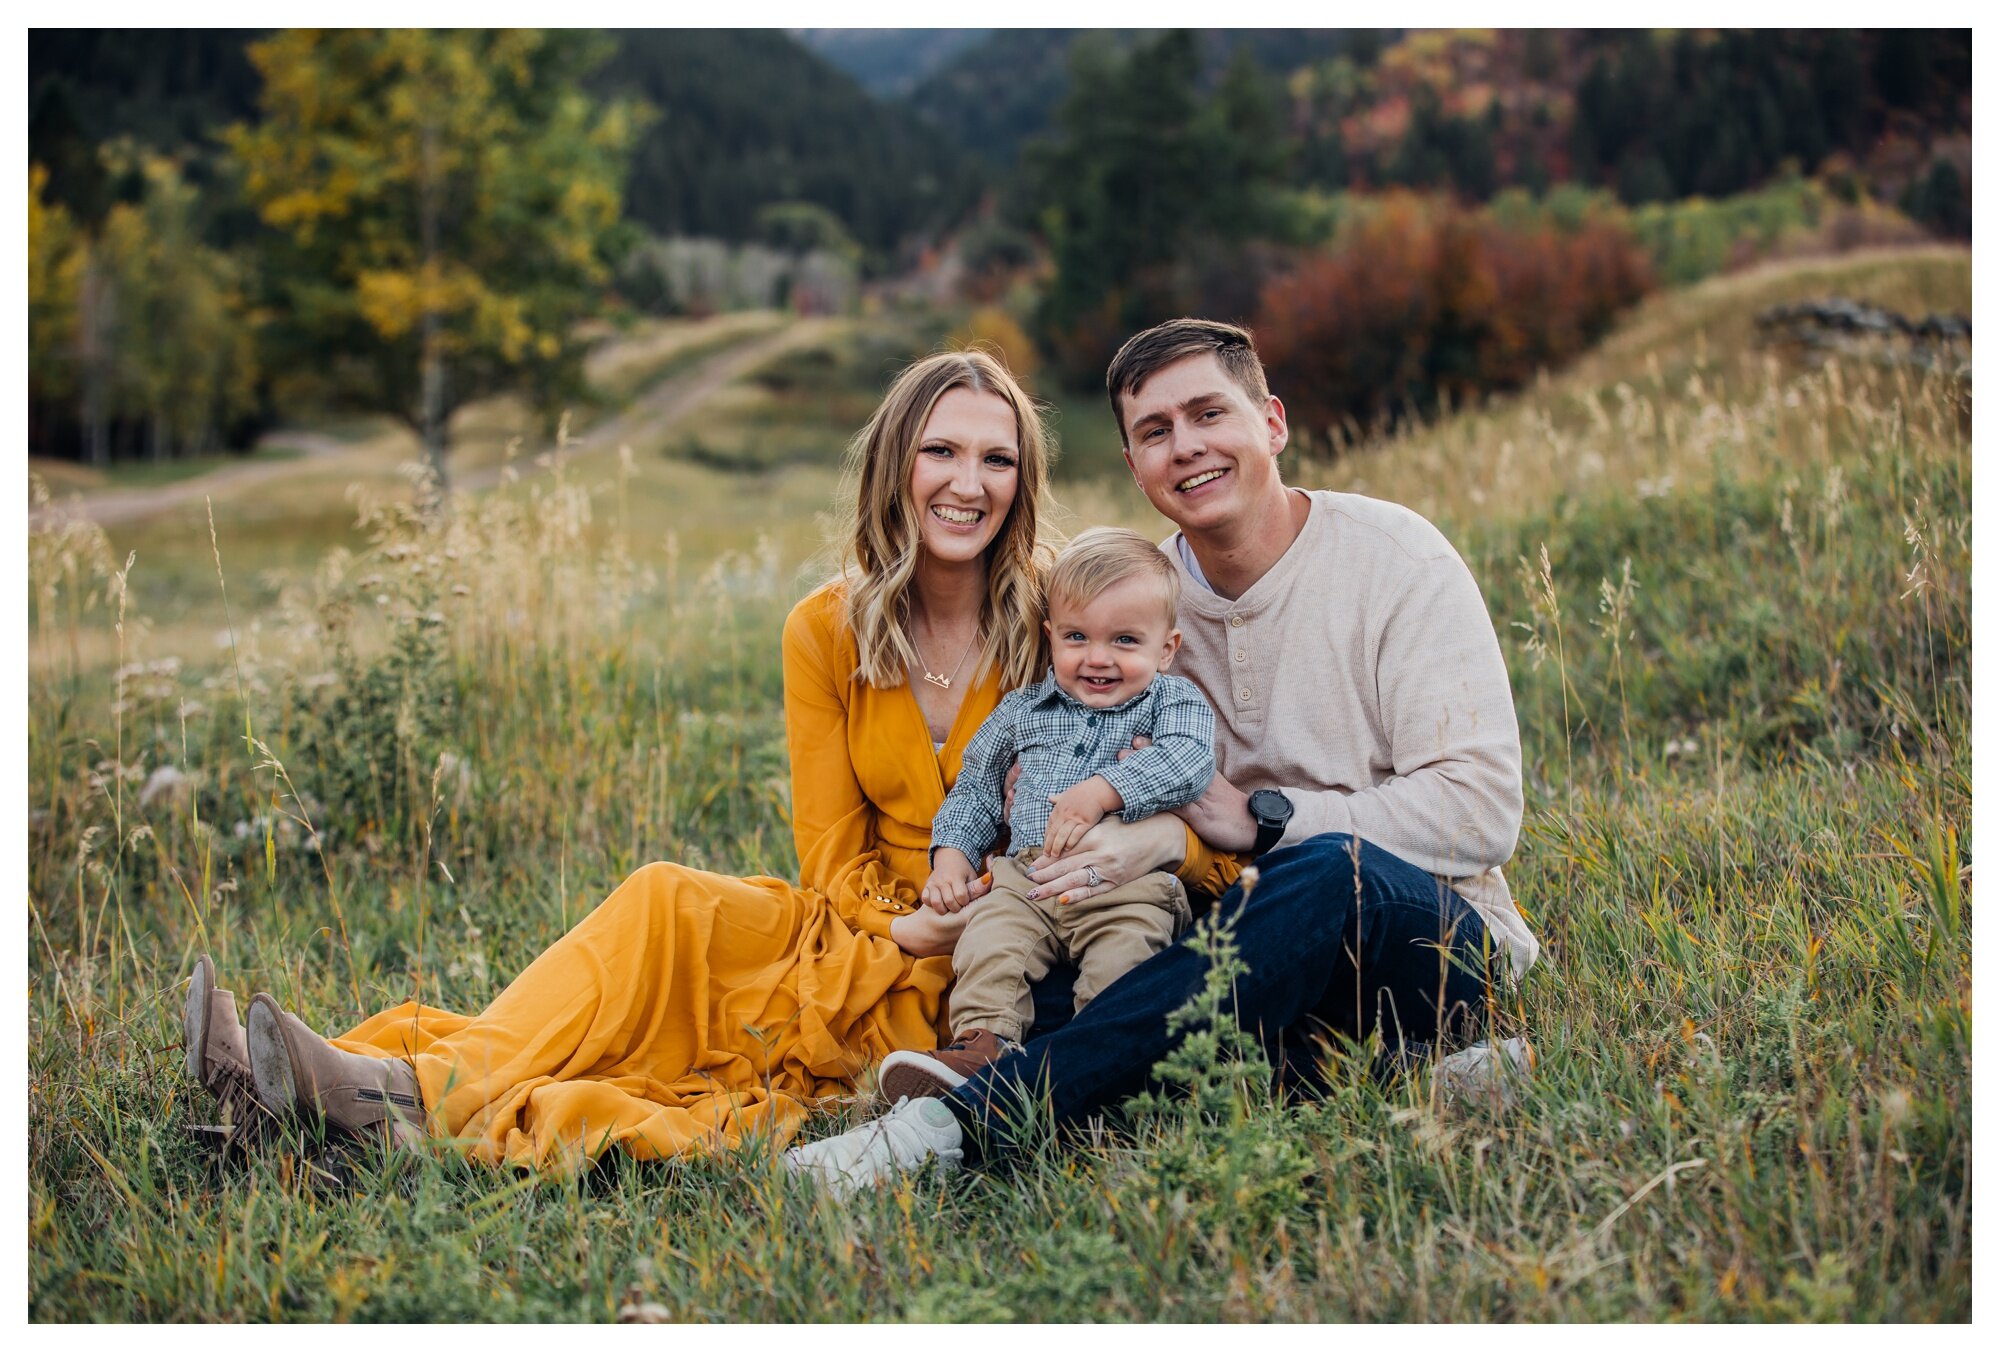 foster-care-adoption-story-idaho-foster-parents-rigby-grand-tetons_0509.jpg